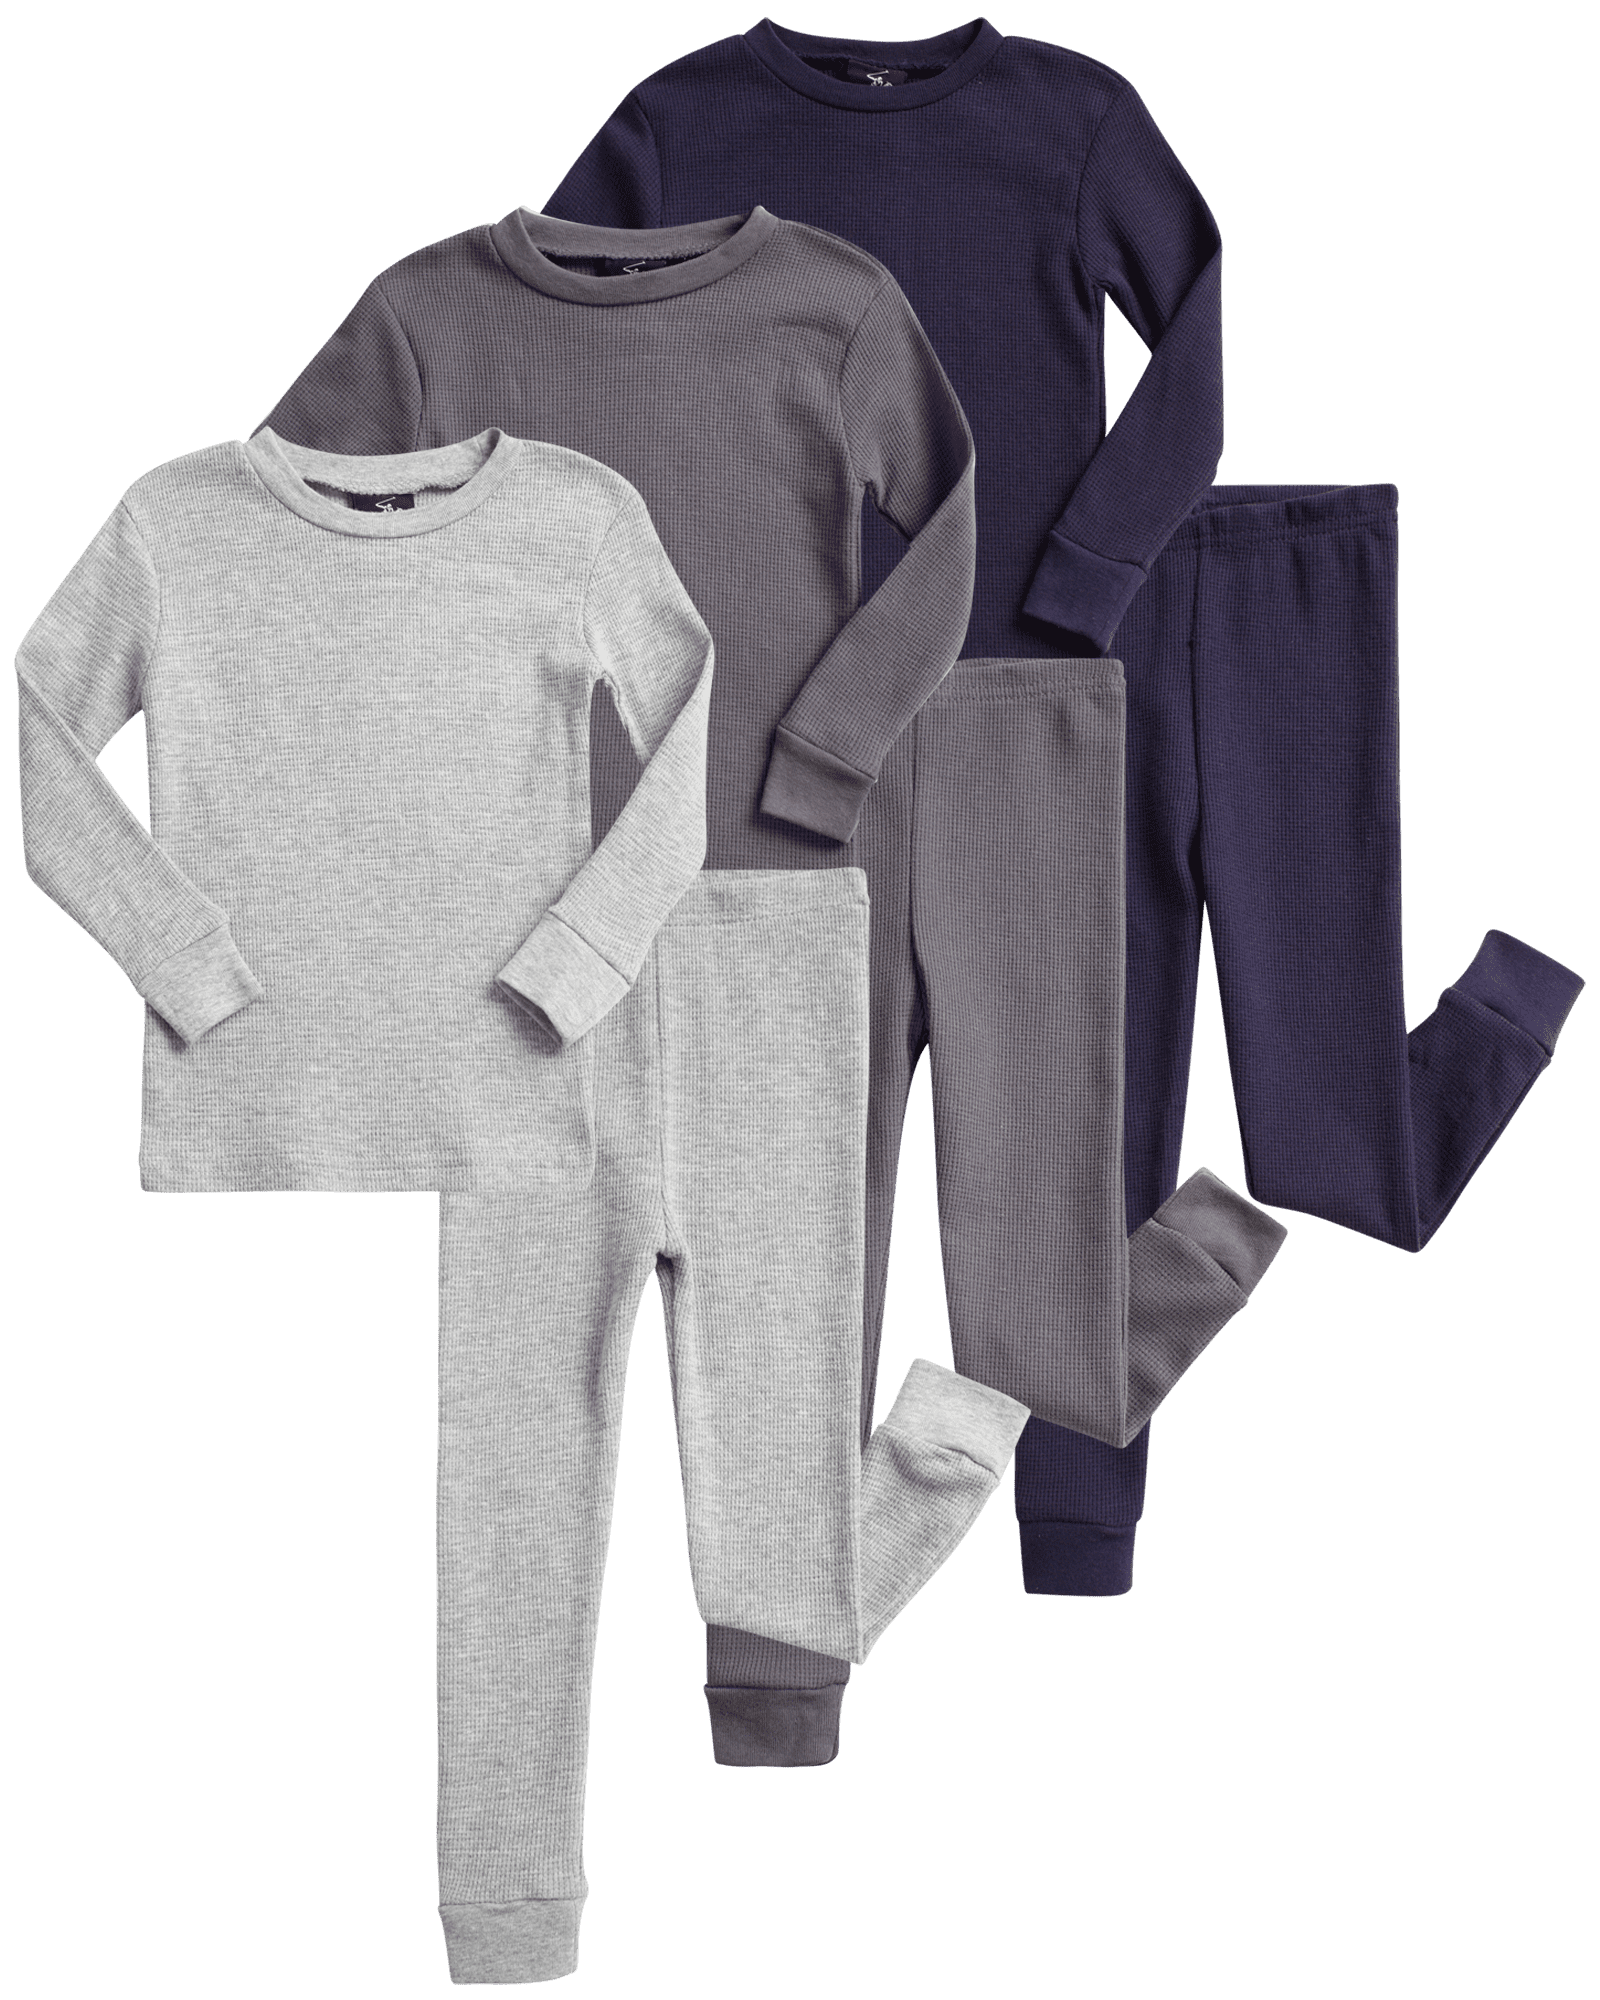 Beverly Hills Polo Club Baby Boys' Thermal Underwear - 6 Piece Waffle Knit  Top and Long John Set (12M-2T)